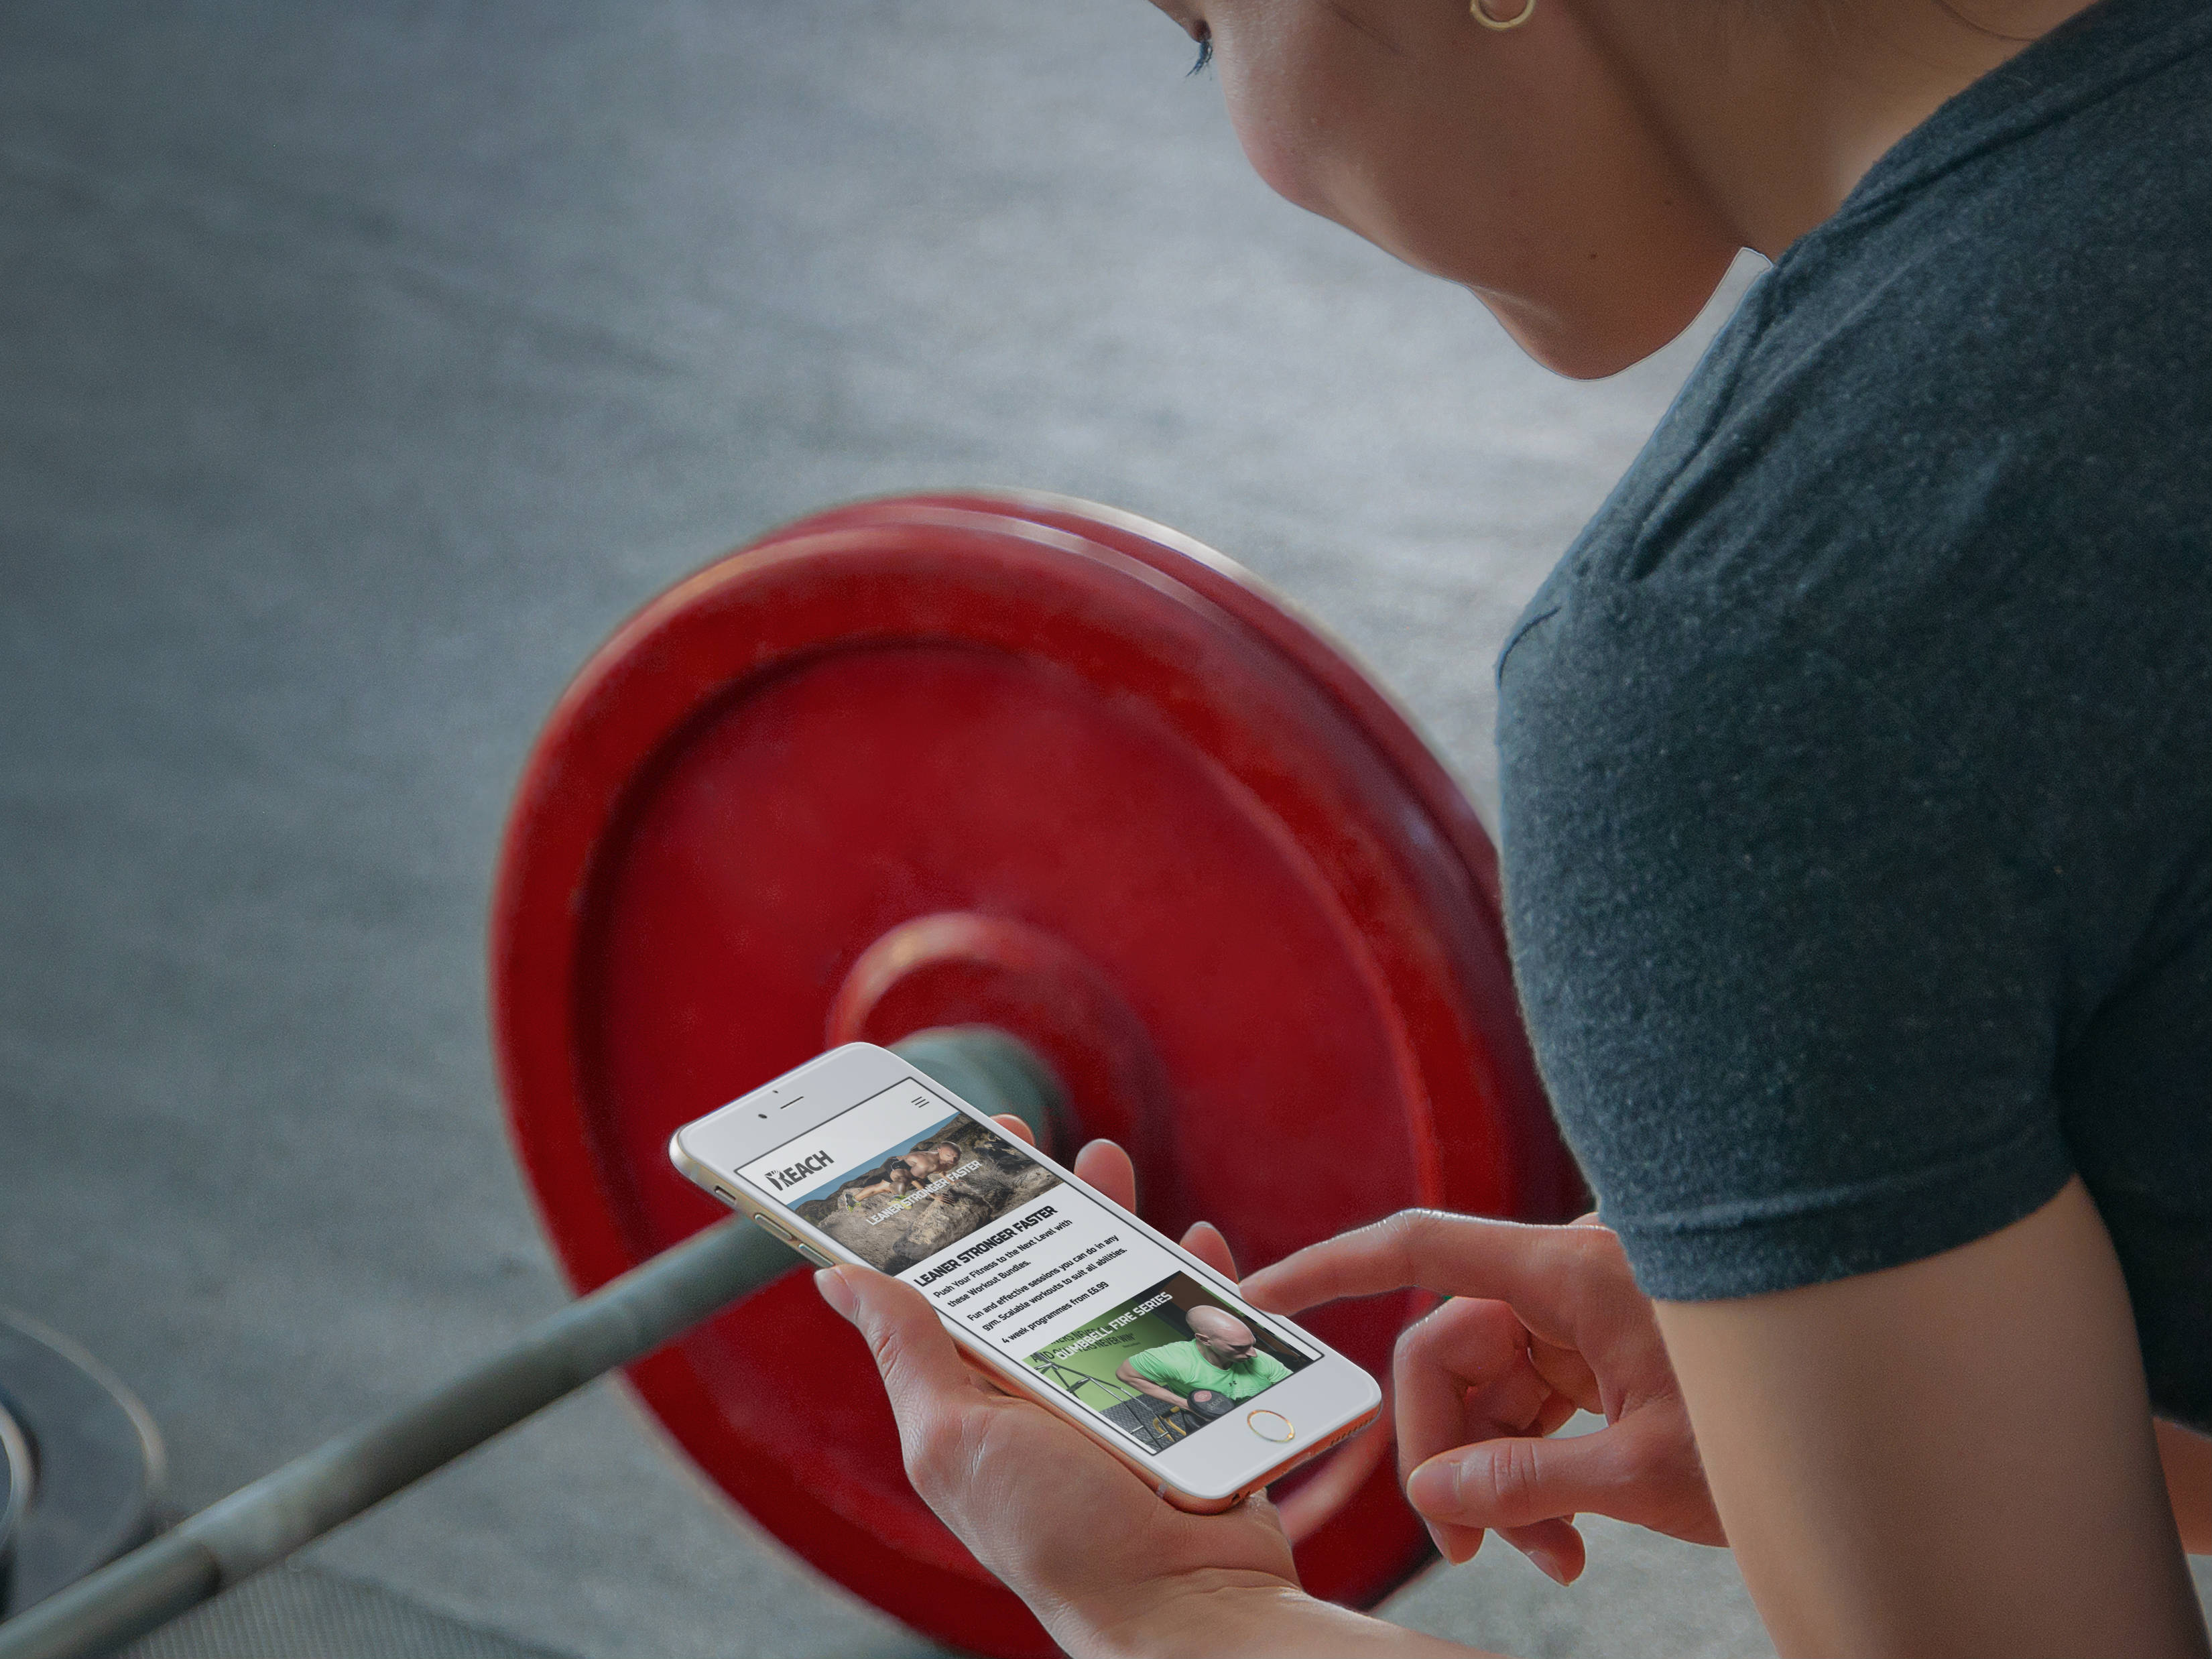 Reach Fitness user holds iPhone 6 rose gold with red bar bell